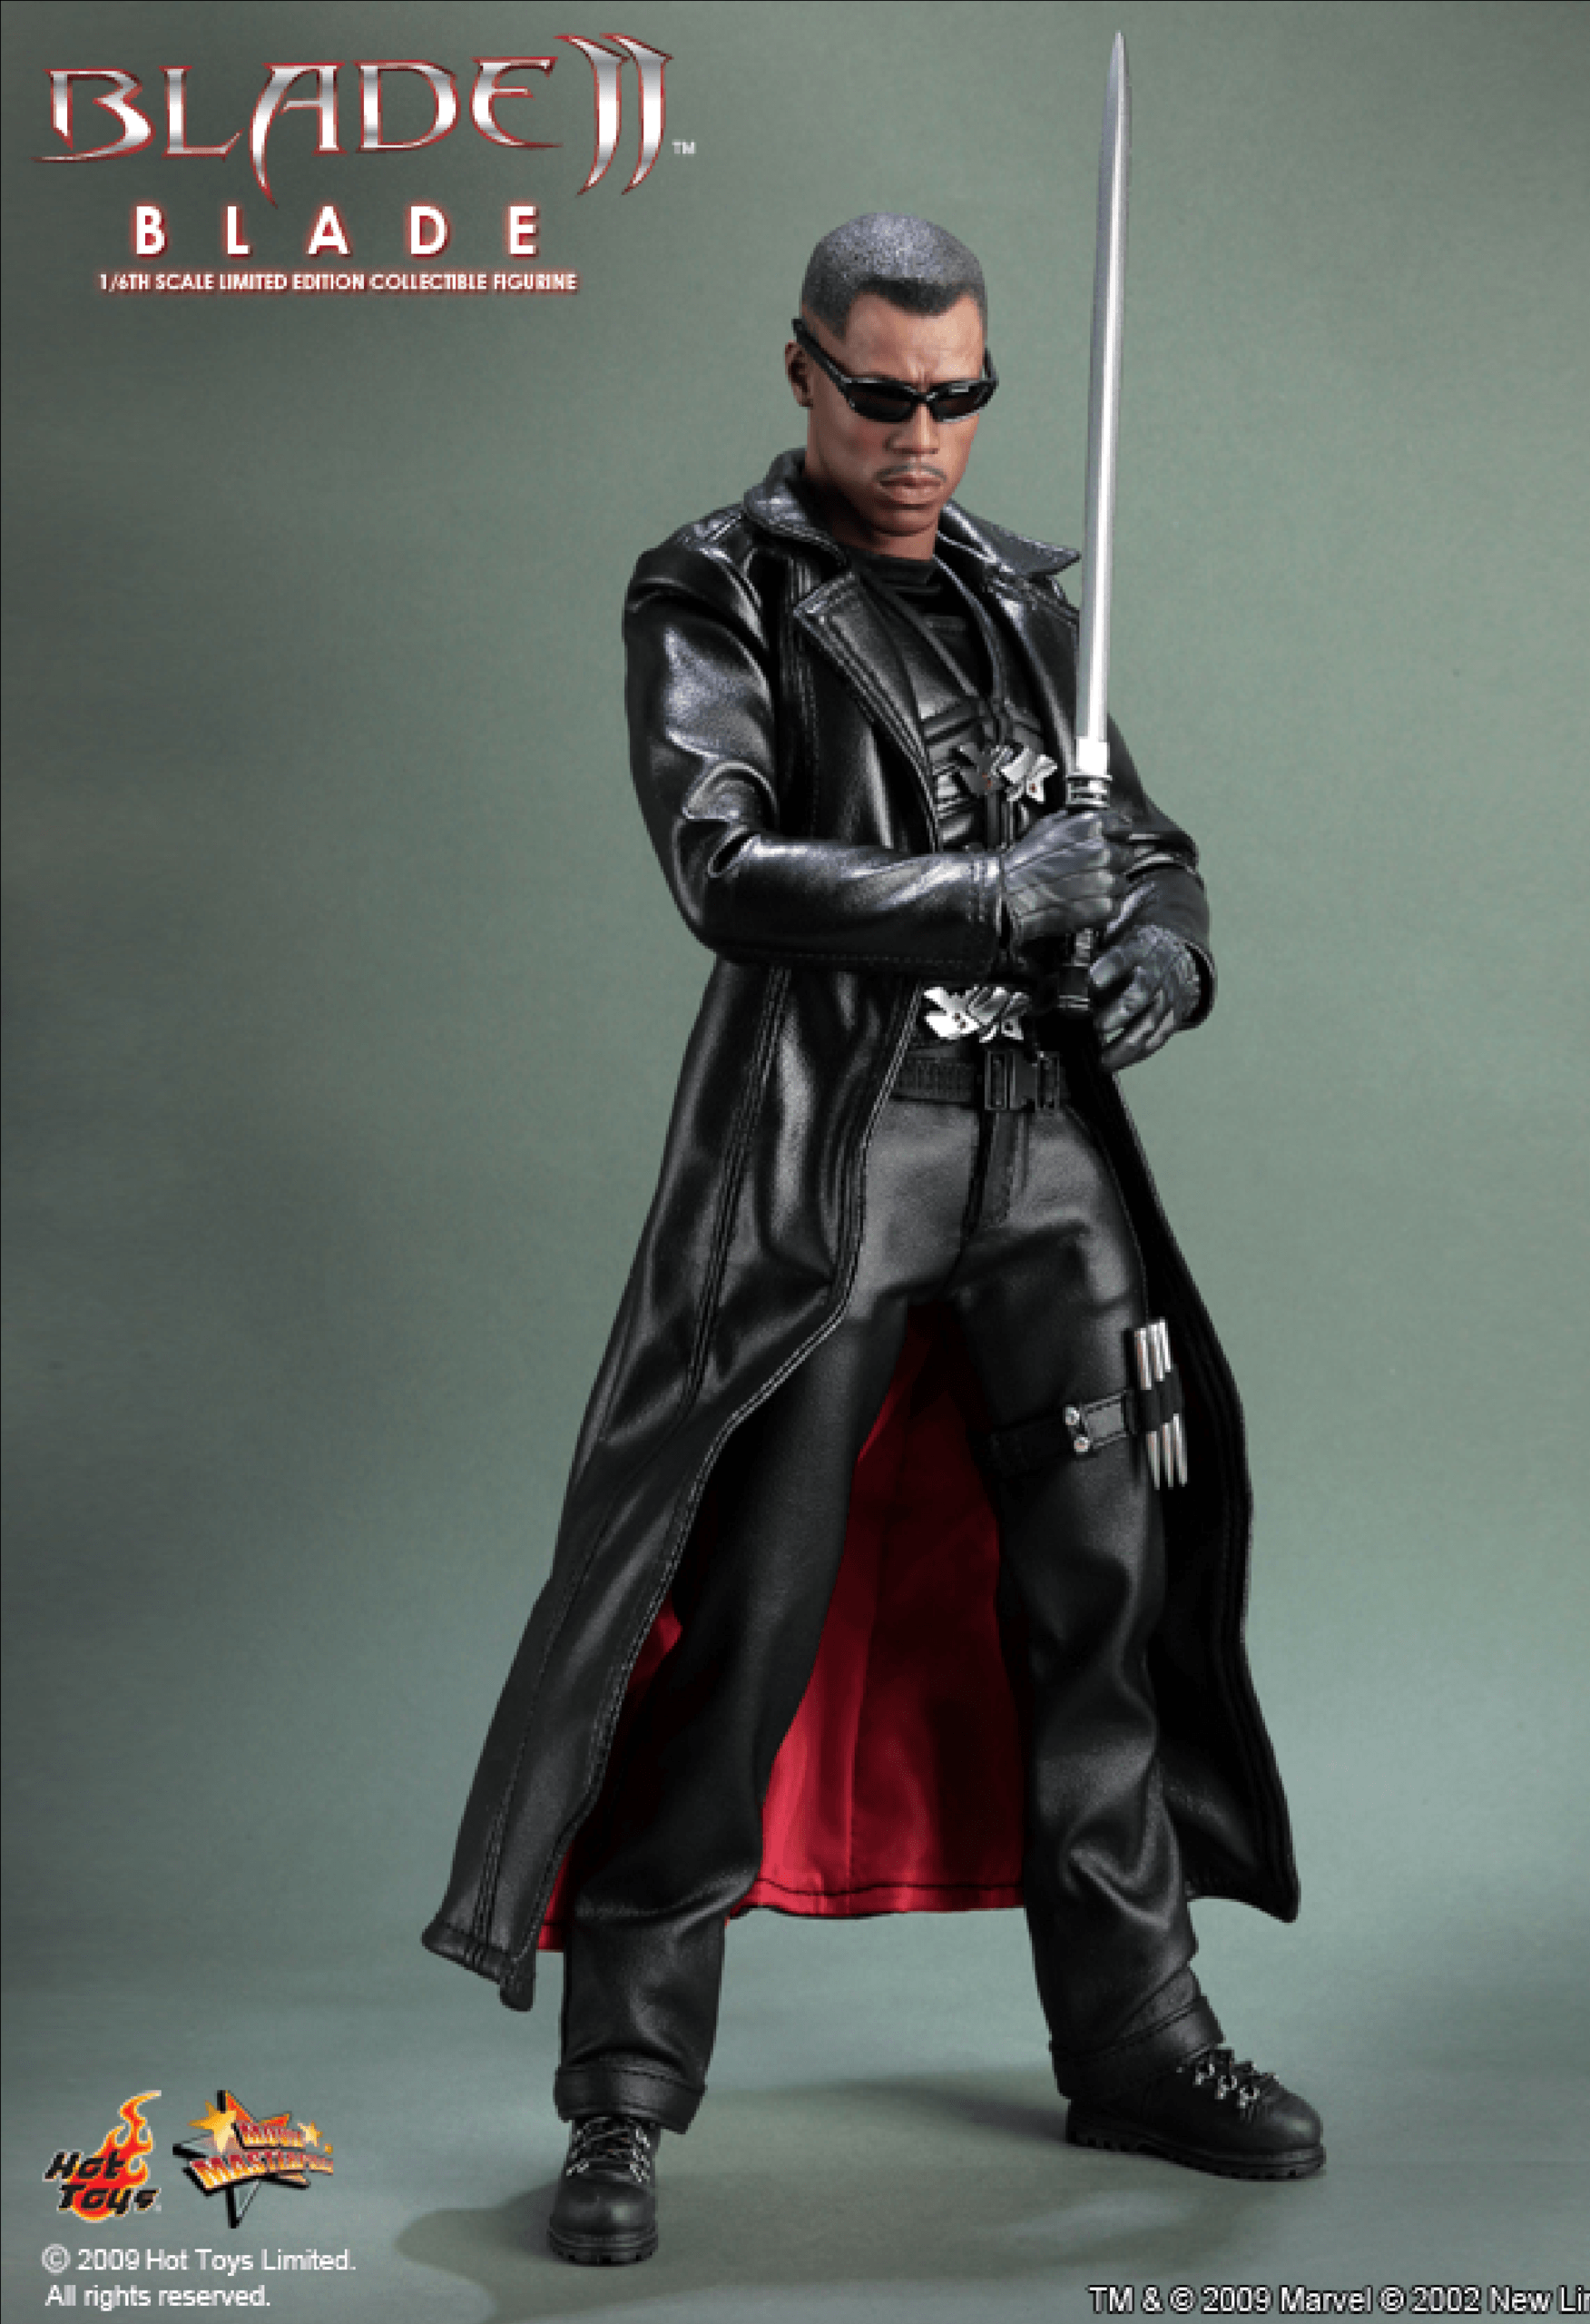 Blade image Blade Action Figure HD wallpaper and background photo